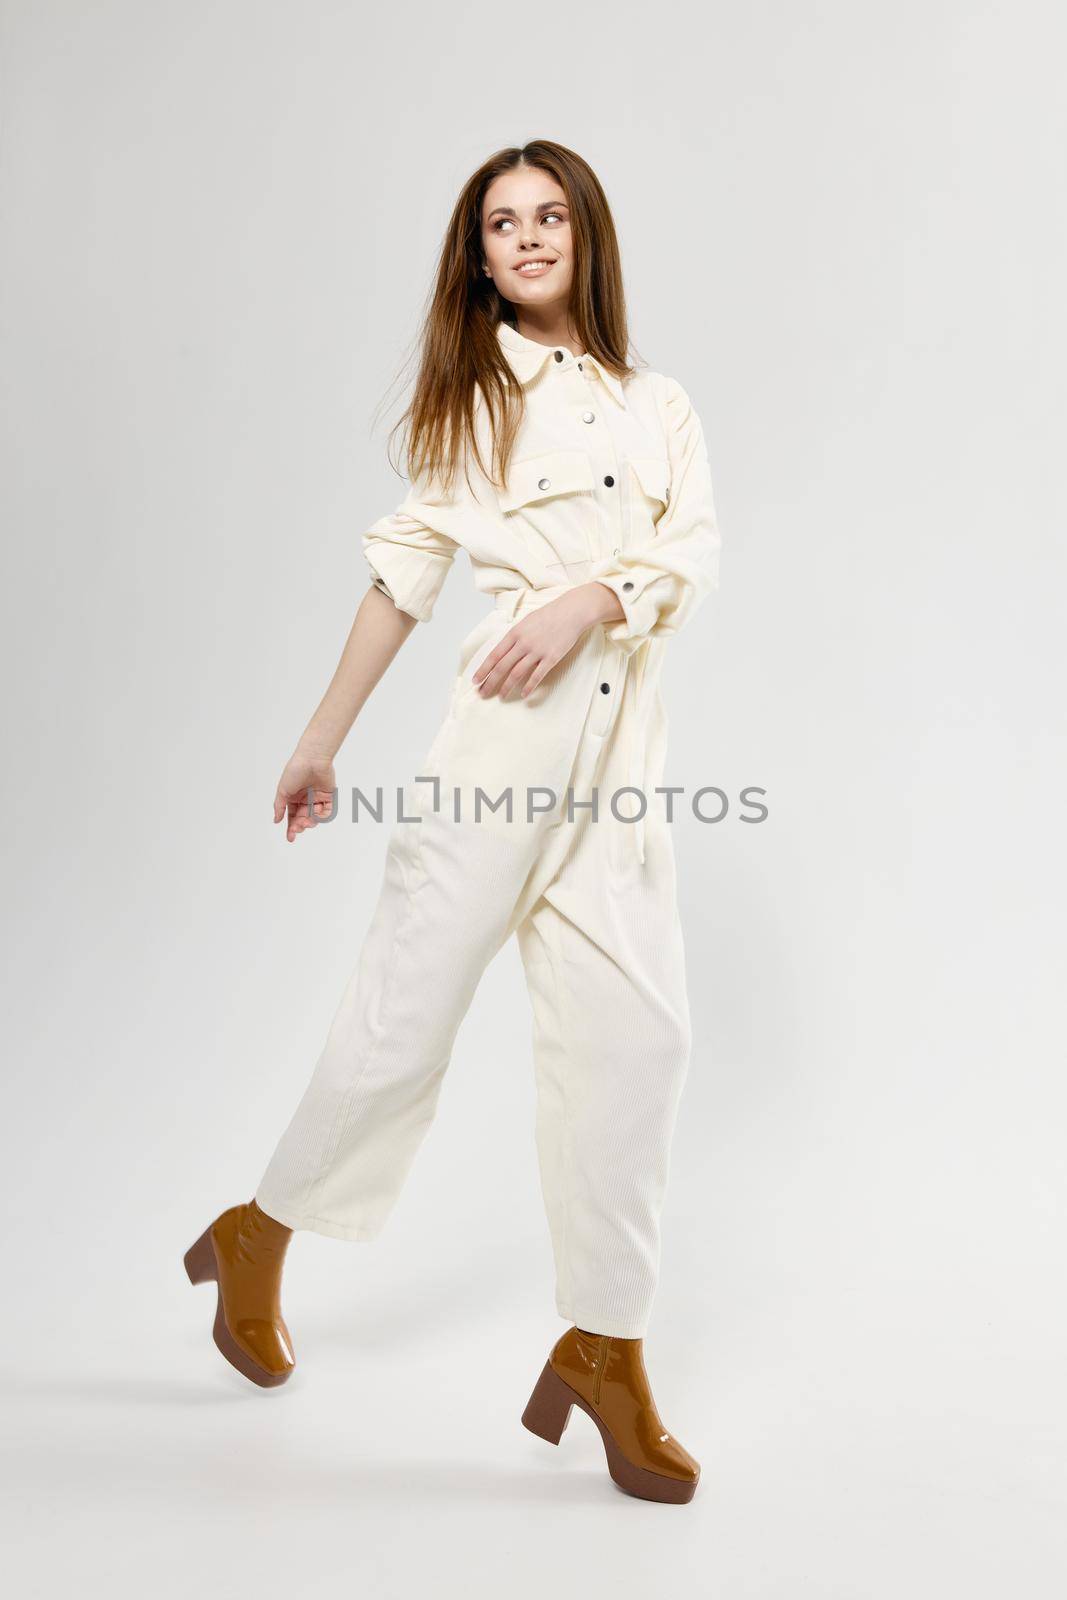 fashionista in overalls and full-length boots on a light background indoors. High quality photo